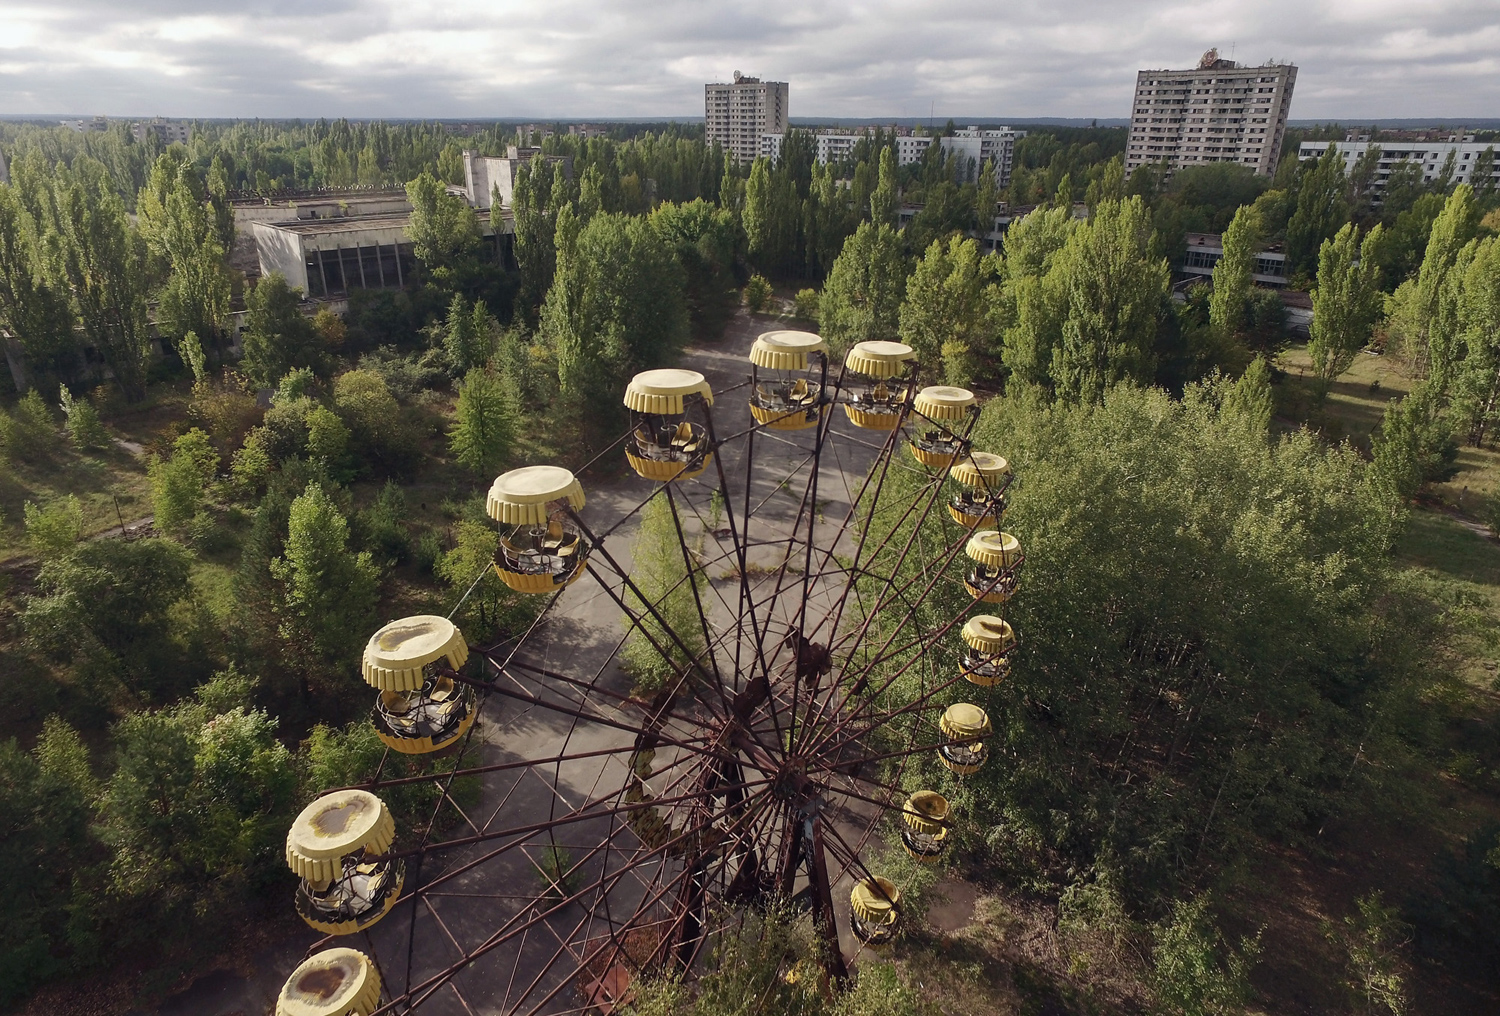 photos of chernobyl aftermath